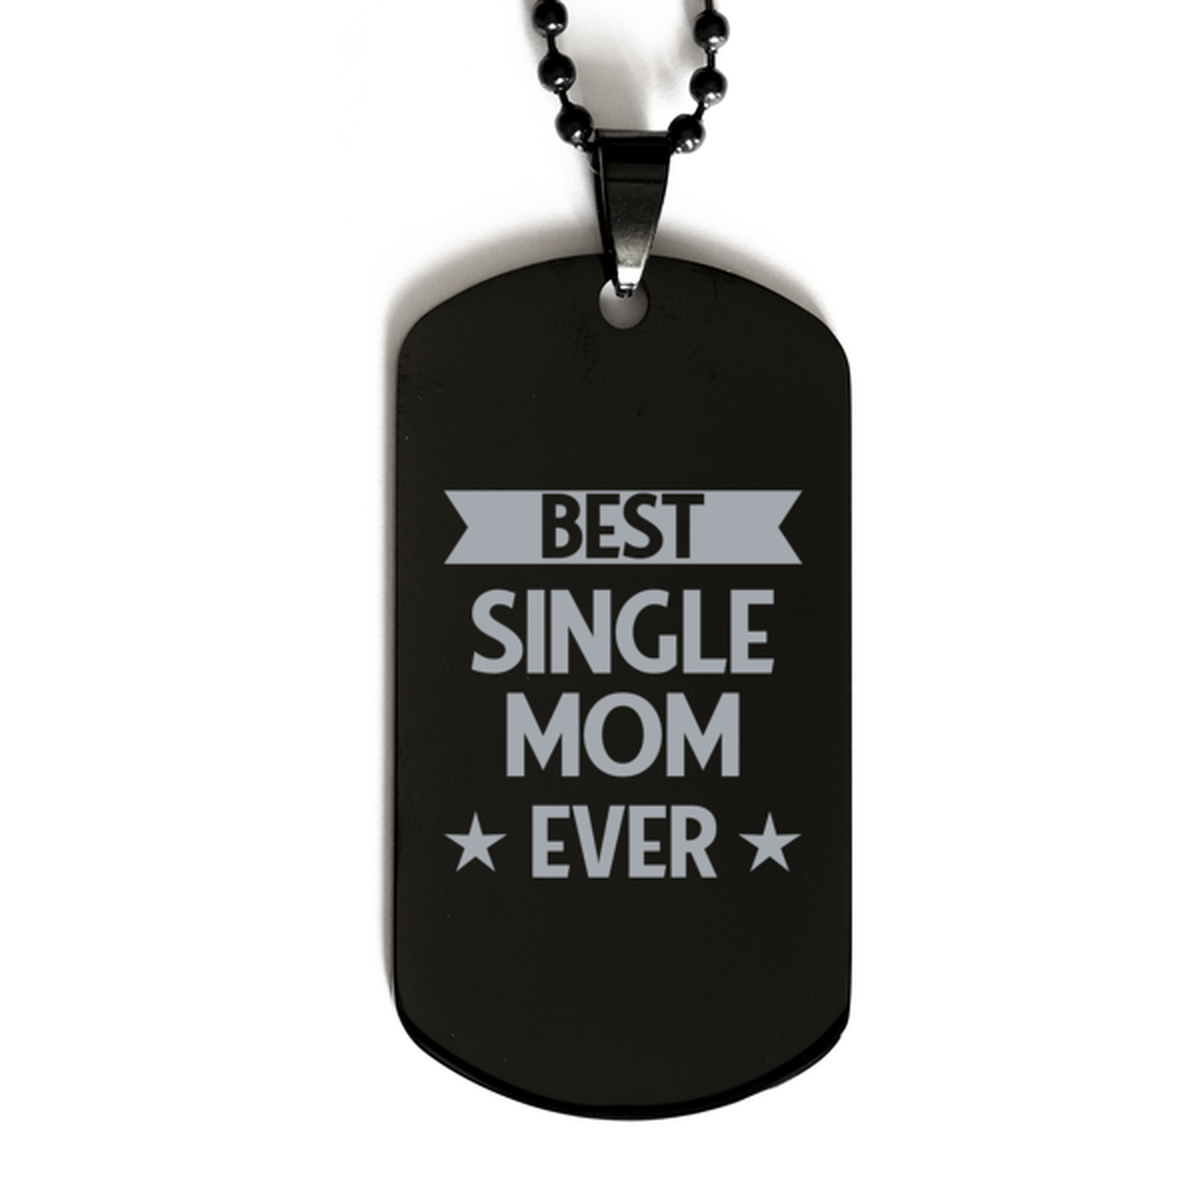 Best Single mom Ever Single mom Gifts, Funny Black Dog Tag For Single mom, Birthday Family Presents Engraved Necklace For Women